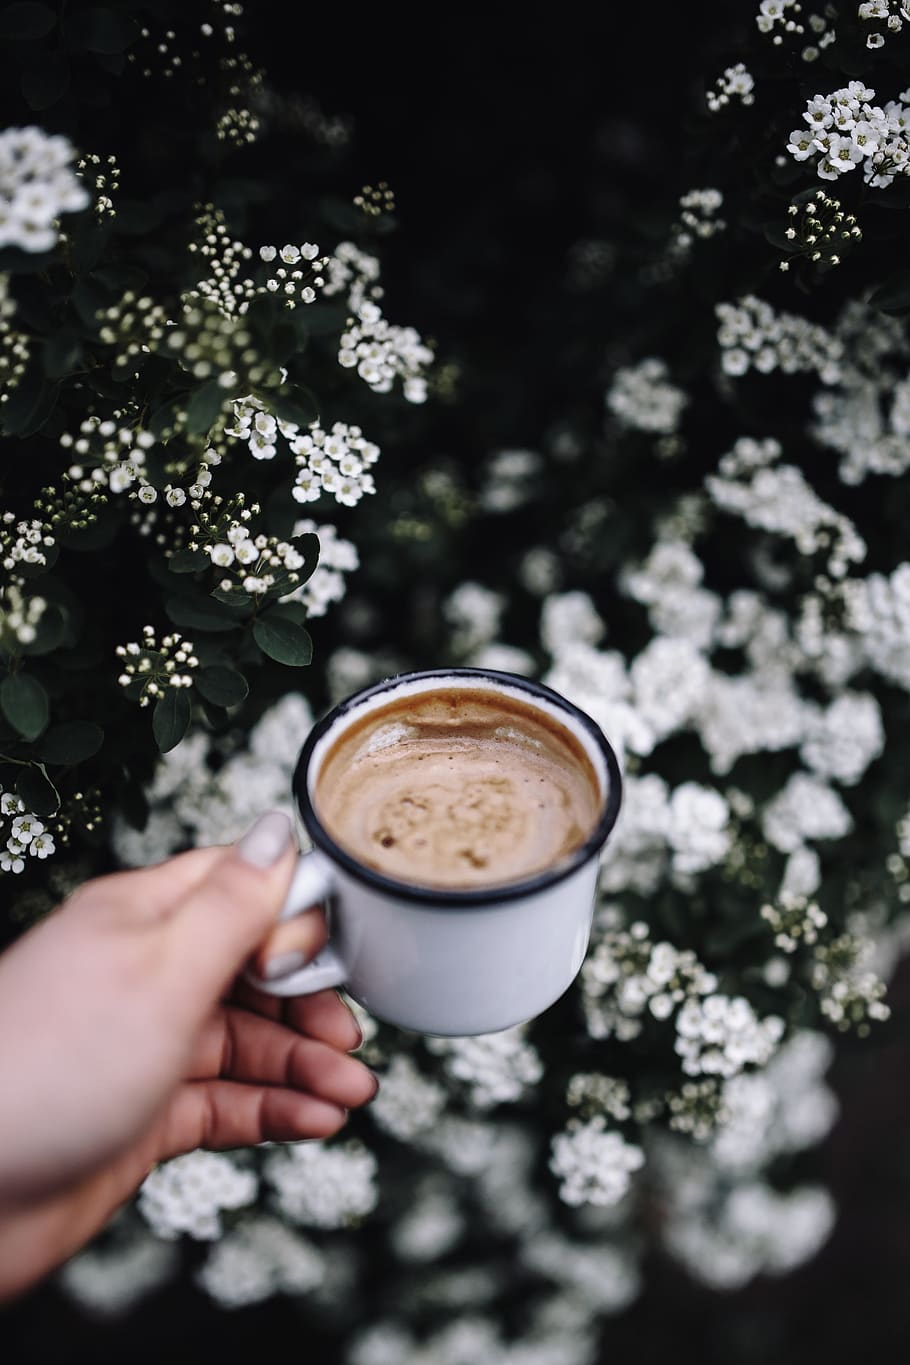 flowers, garden, coffee, cup, cappucino, late, outdoors, Morning, human hand, coffee - drink